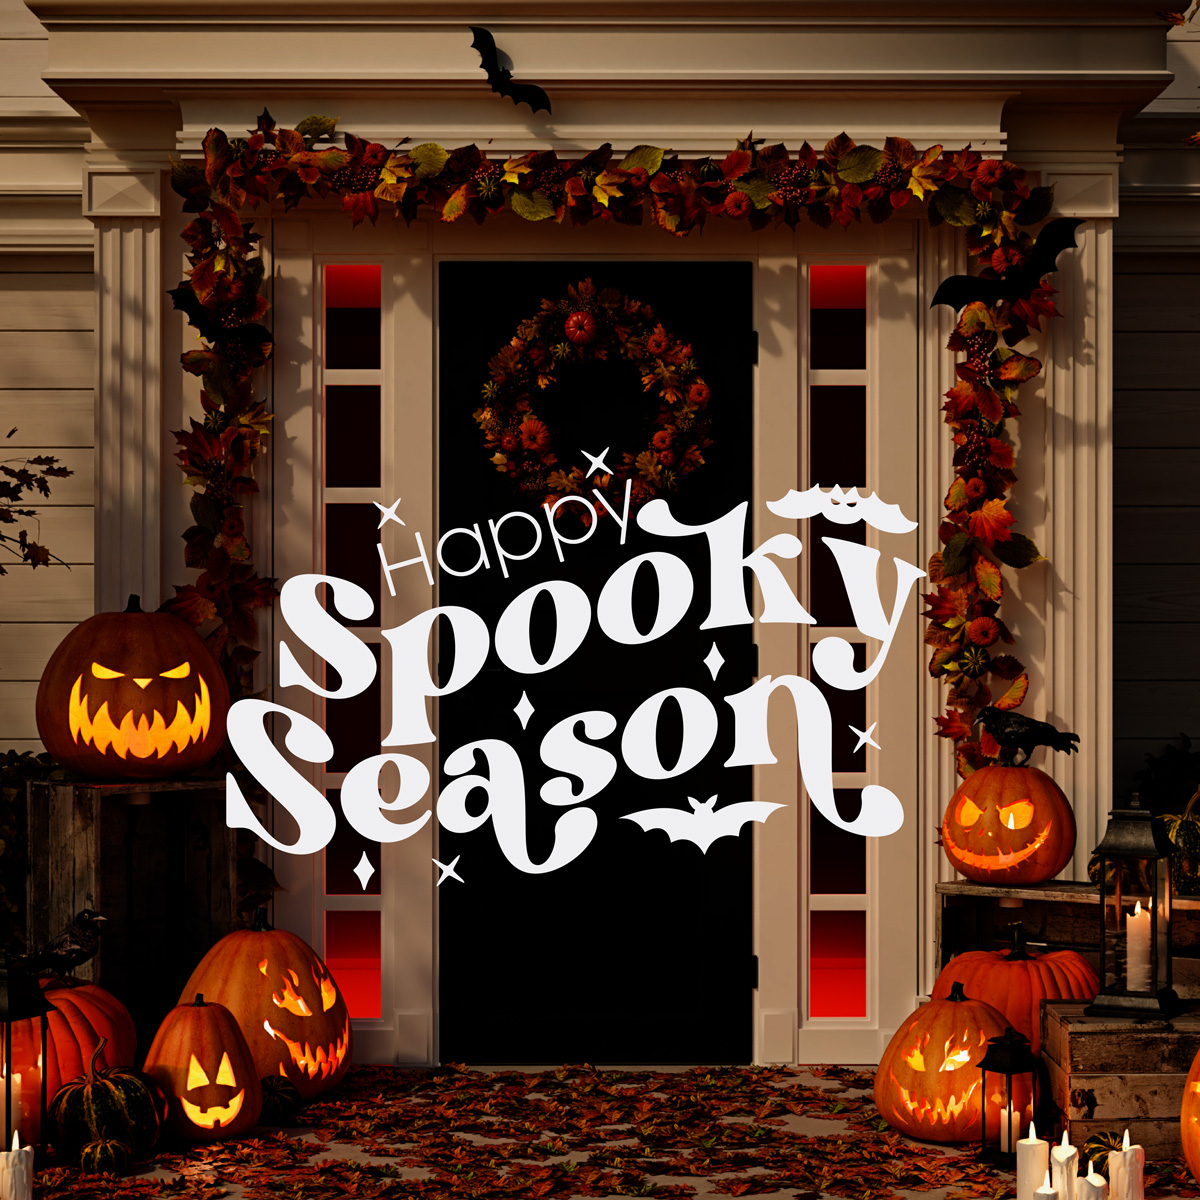 🎃👻 Happy Spooky Season! 👻🎃
As the leaves change colors and the nights grow longer, our team wishes you a hauntingly delightful time during this  Season! we hope you have a frightfully fun and safe Halloween #FrightfulFun